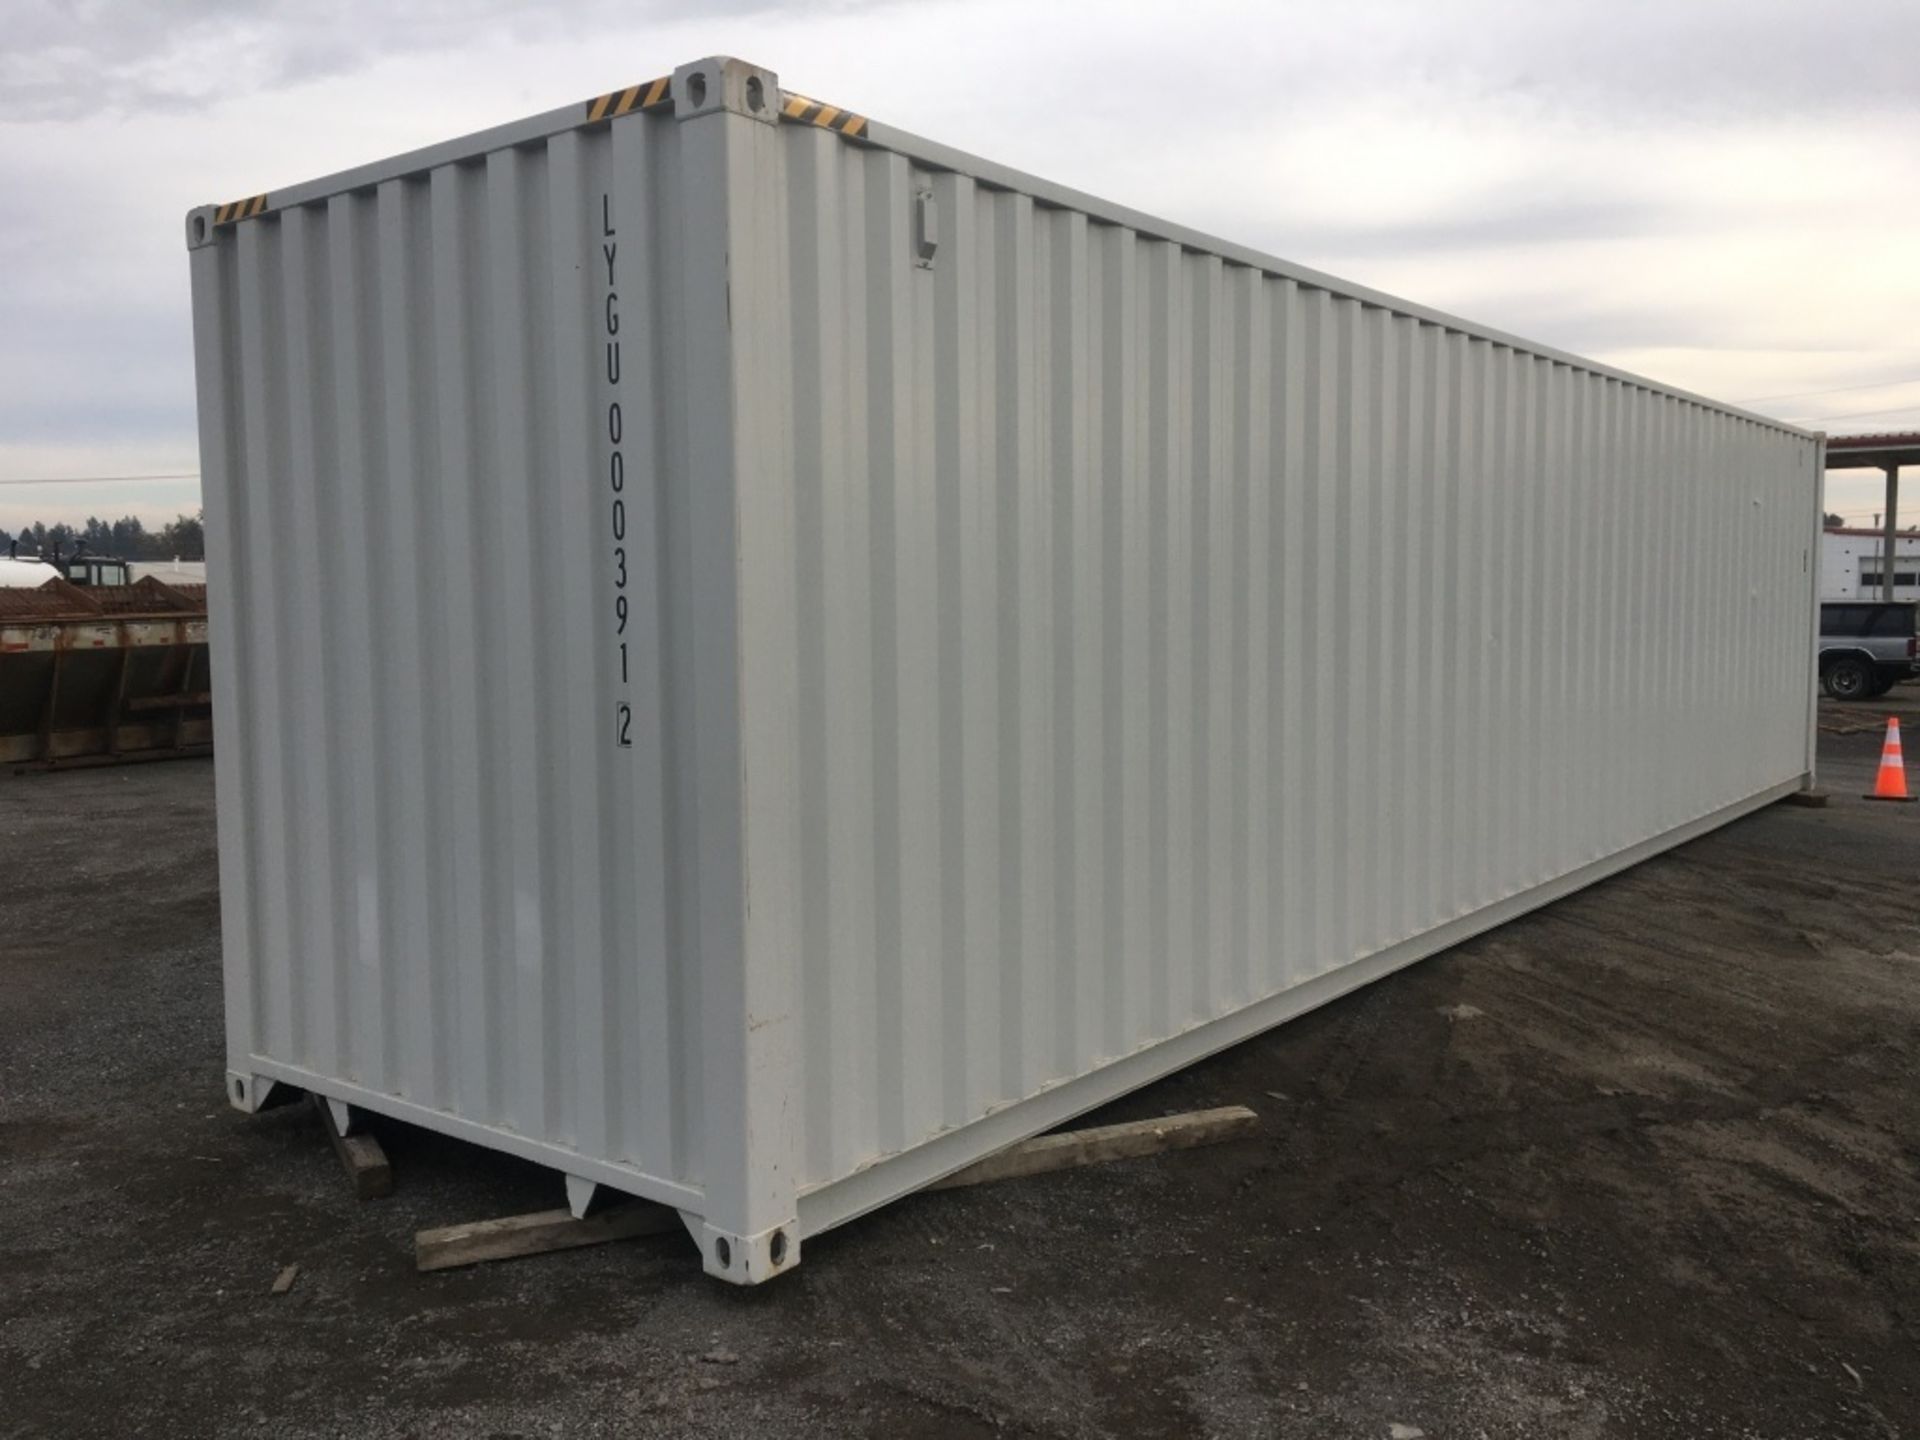 2020 Wolverine 40' Shipping Container - Image 3 of 6